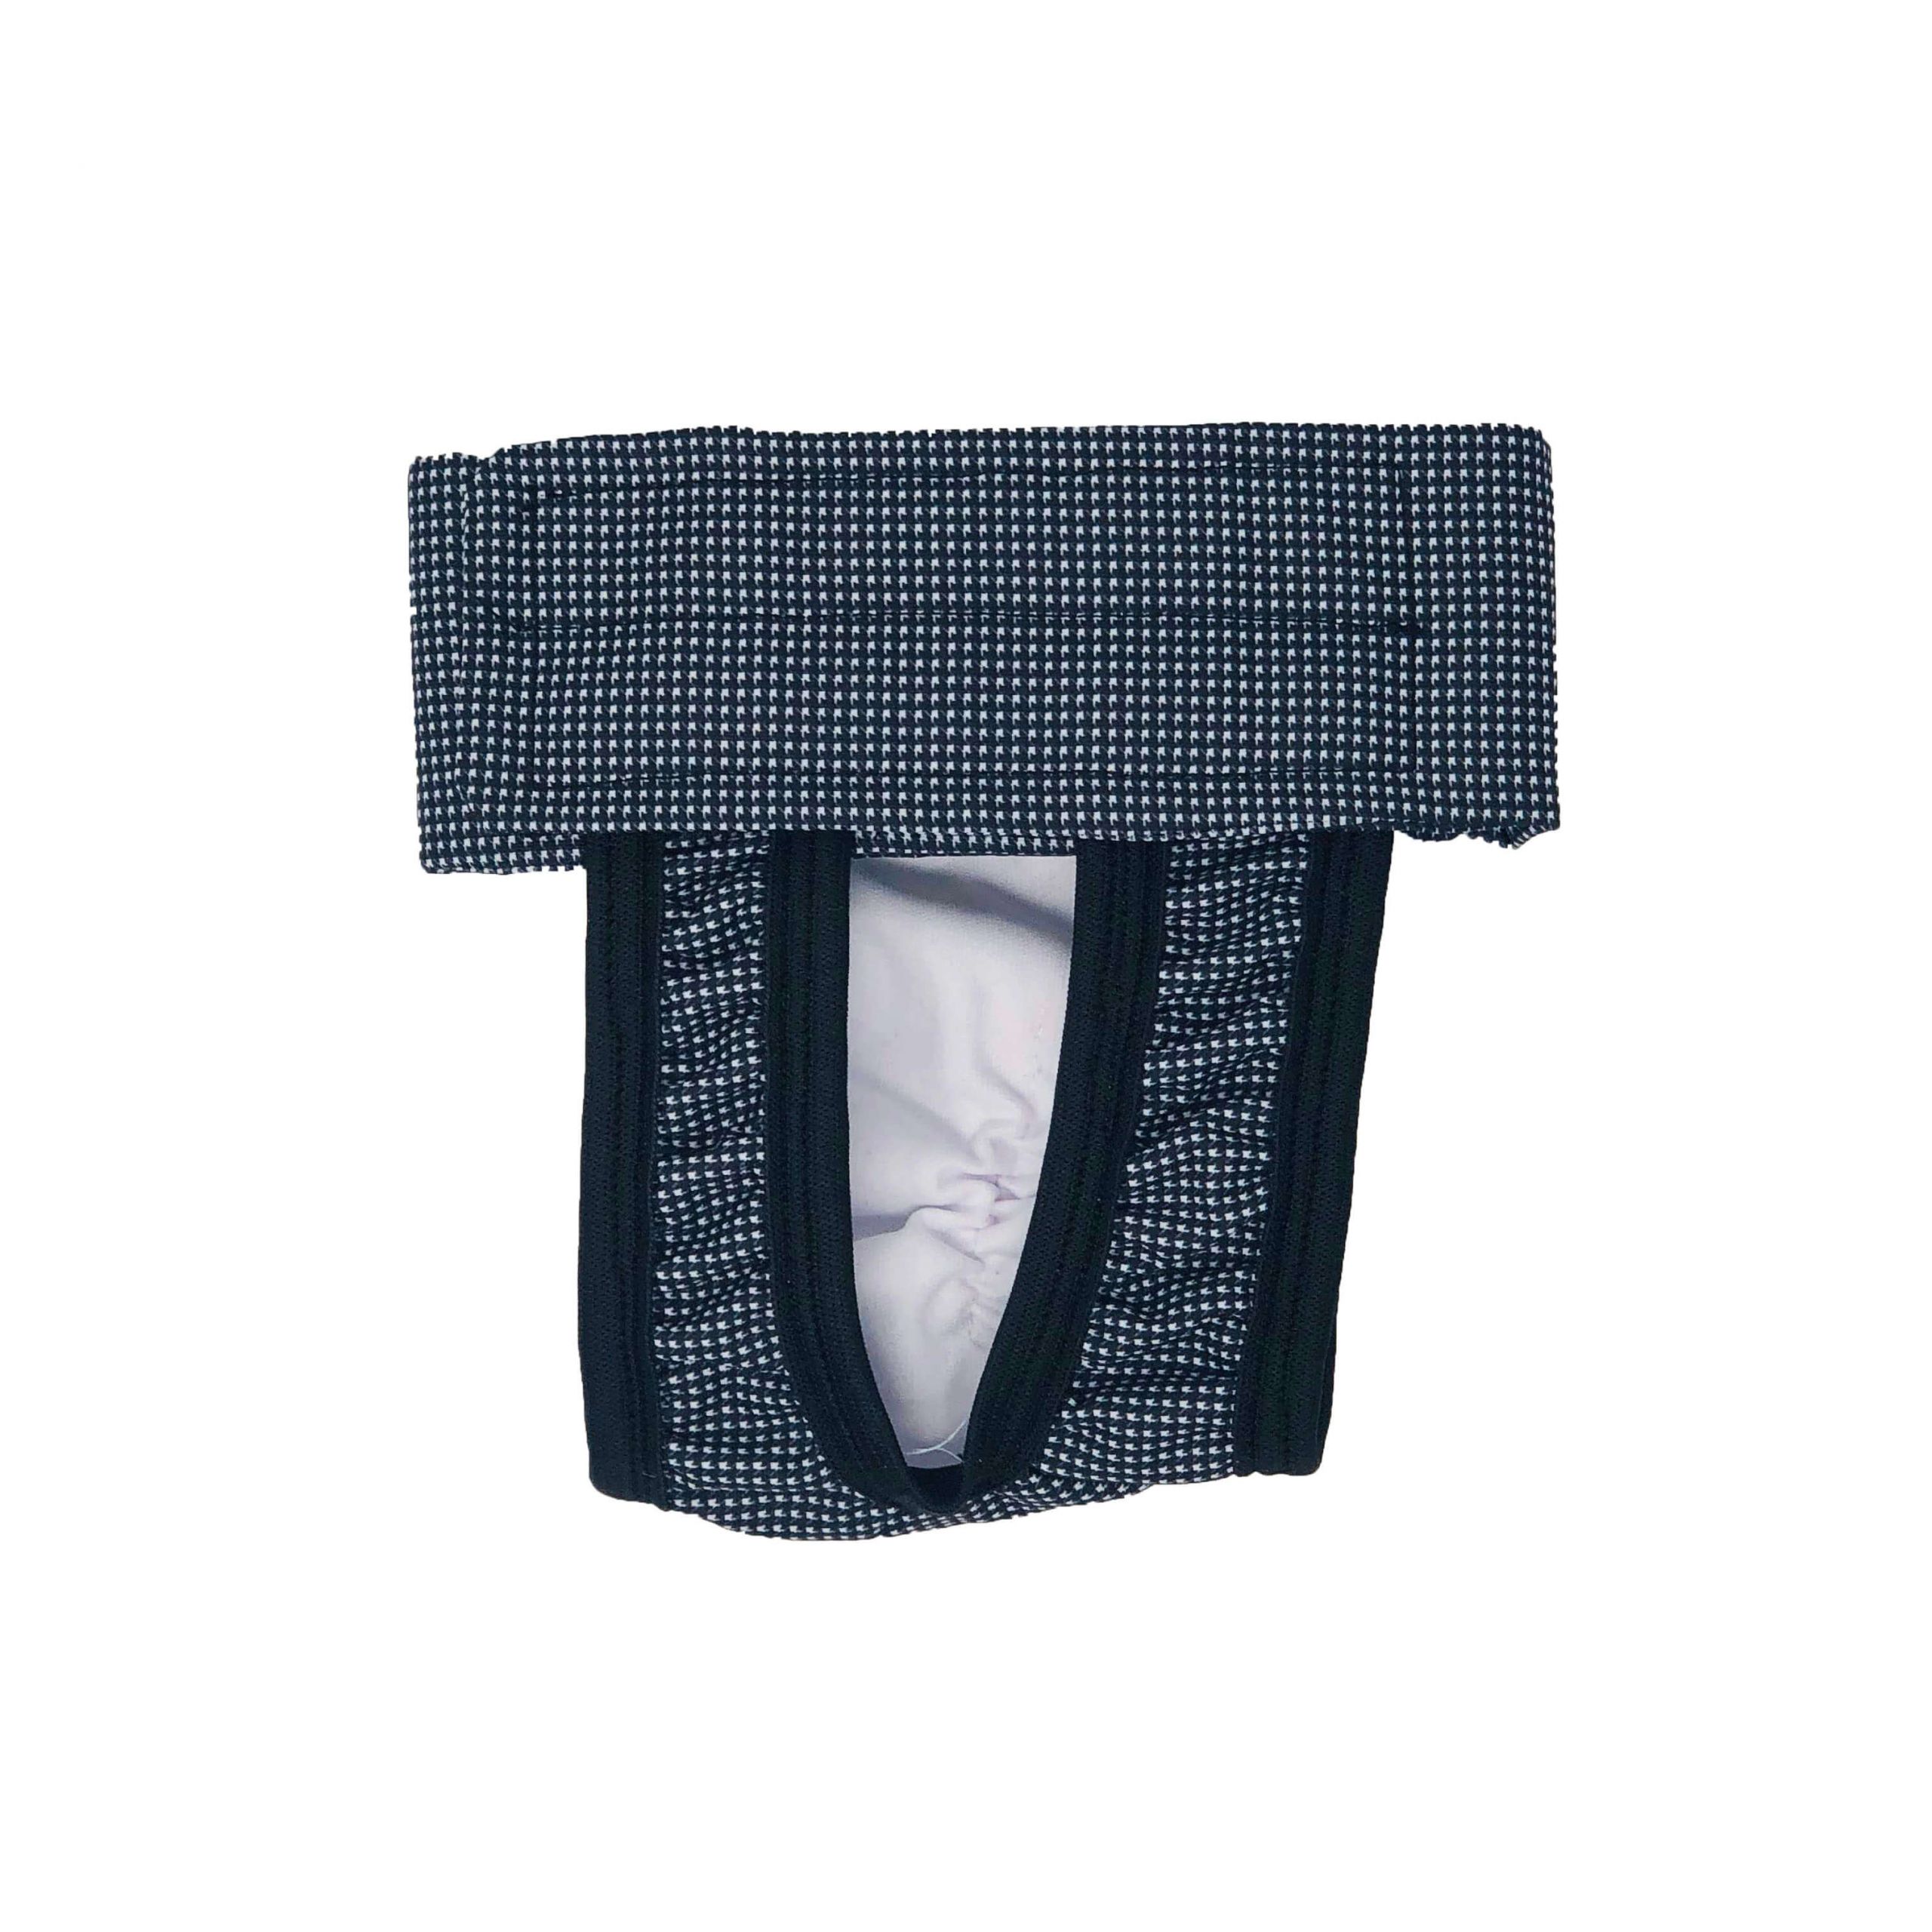 Black and White Gingham   Cat Diaper Pull-up